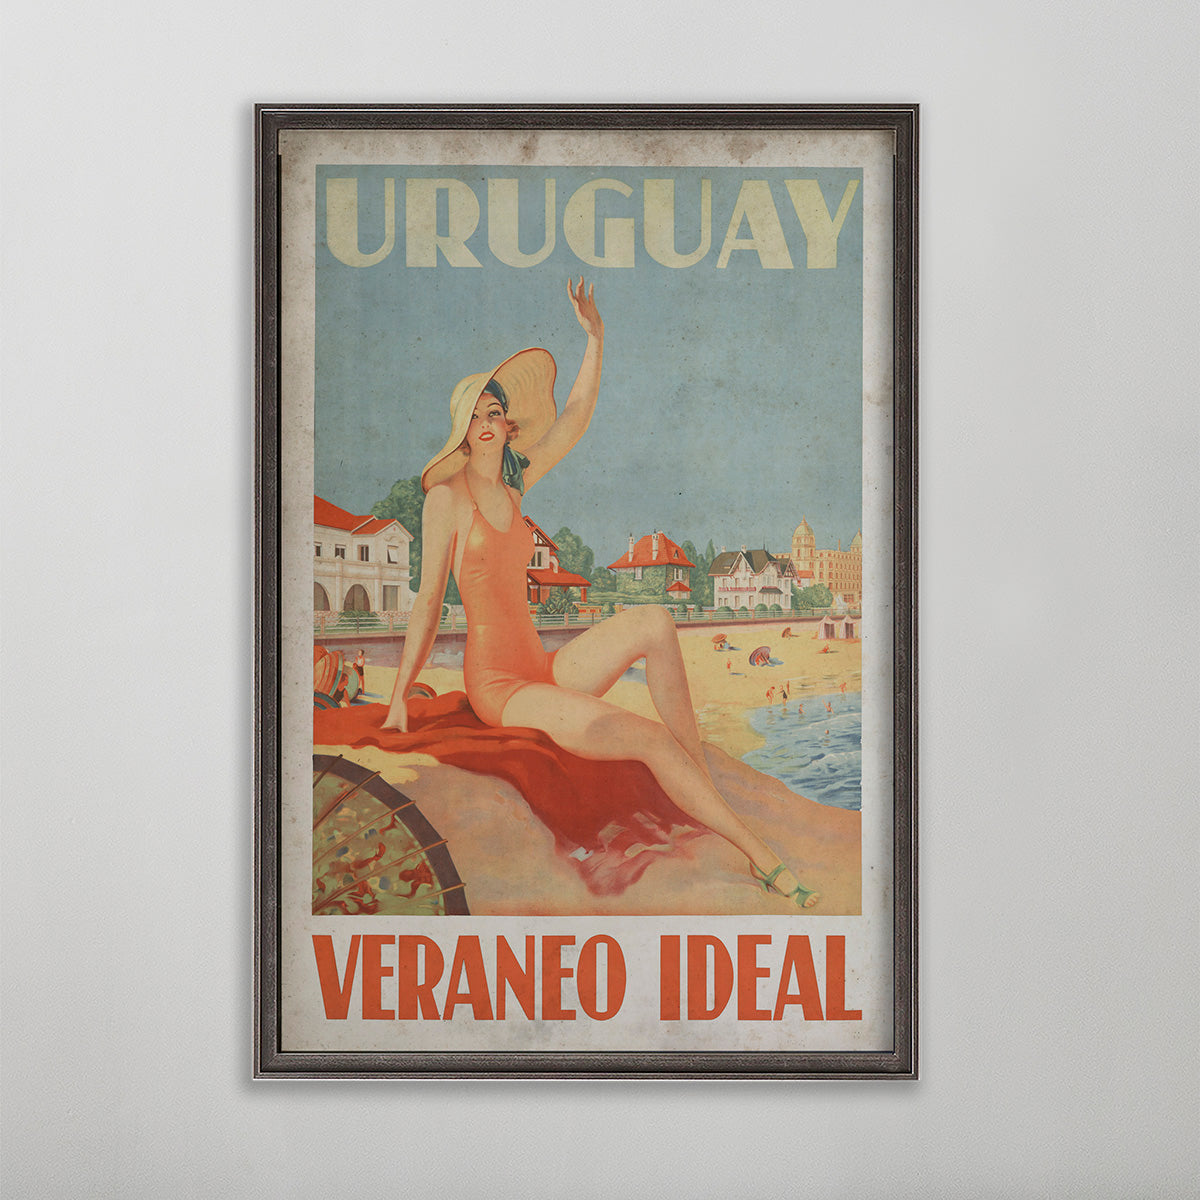 Uruguay vintage travel poster Woman wearing one piece bathing suit sitting on a red towel on the beach.